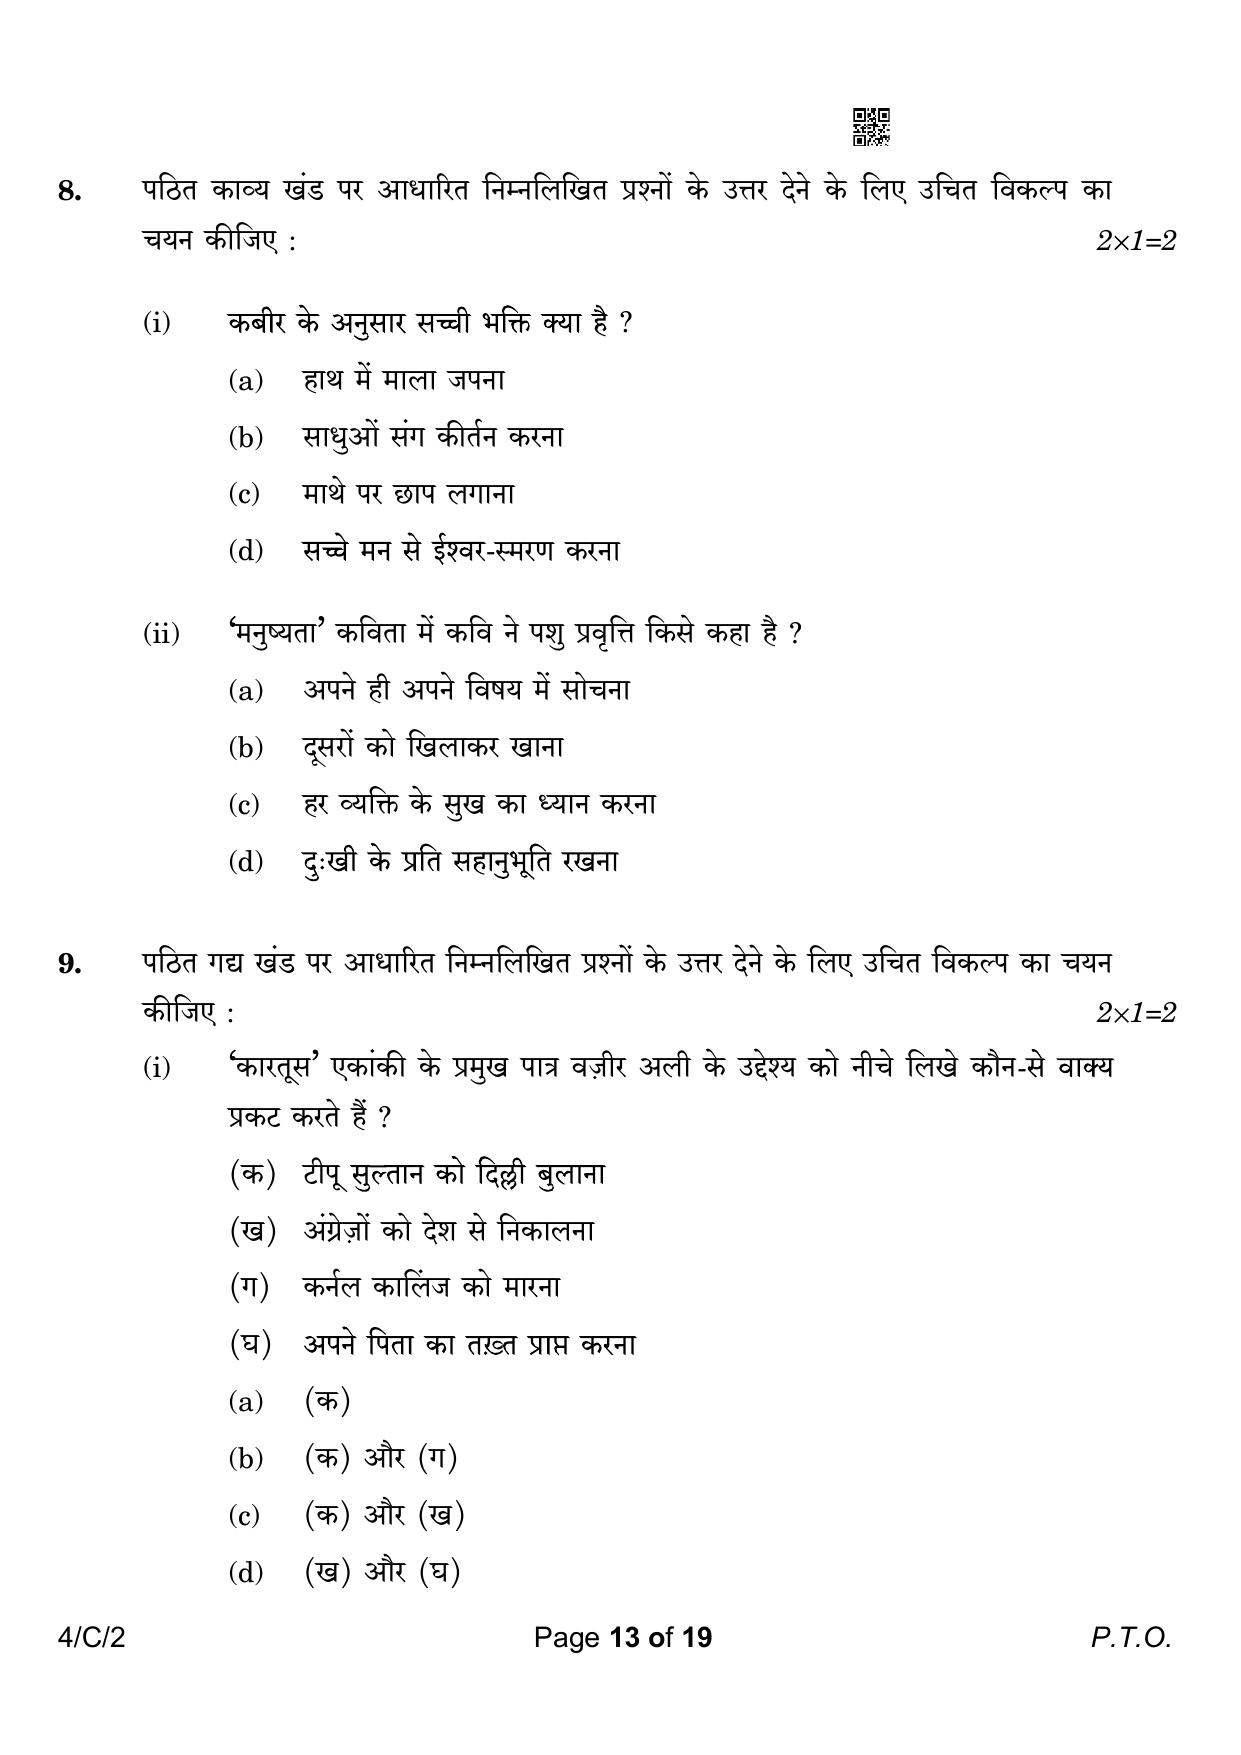 CBSE Class 10 4-2 Hindi B 2023 (Compartment) Question Paper - Page 13